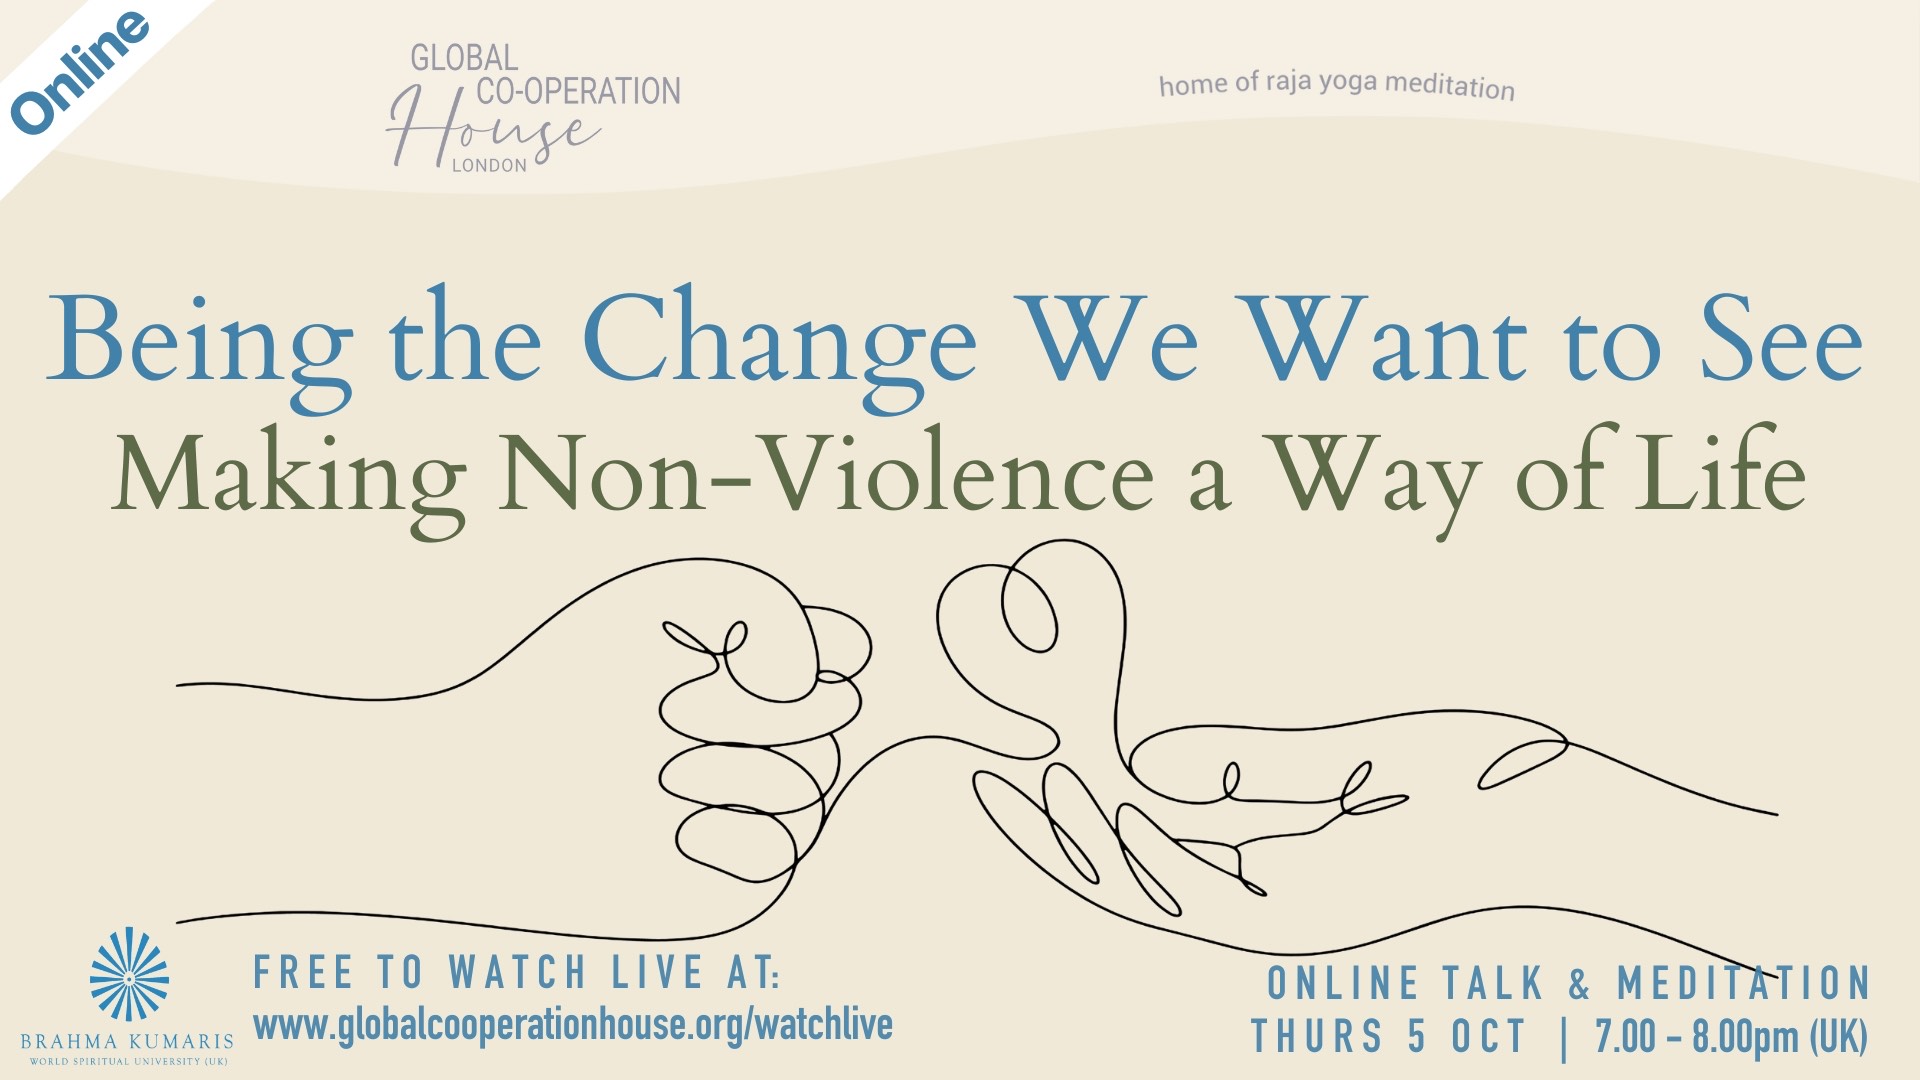 Being the Change We Want to See - Making Non-violence a Way of Life